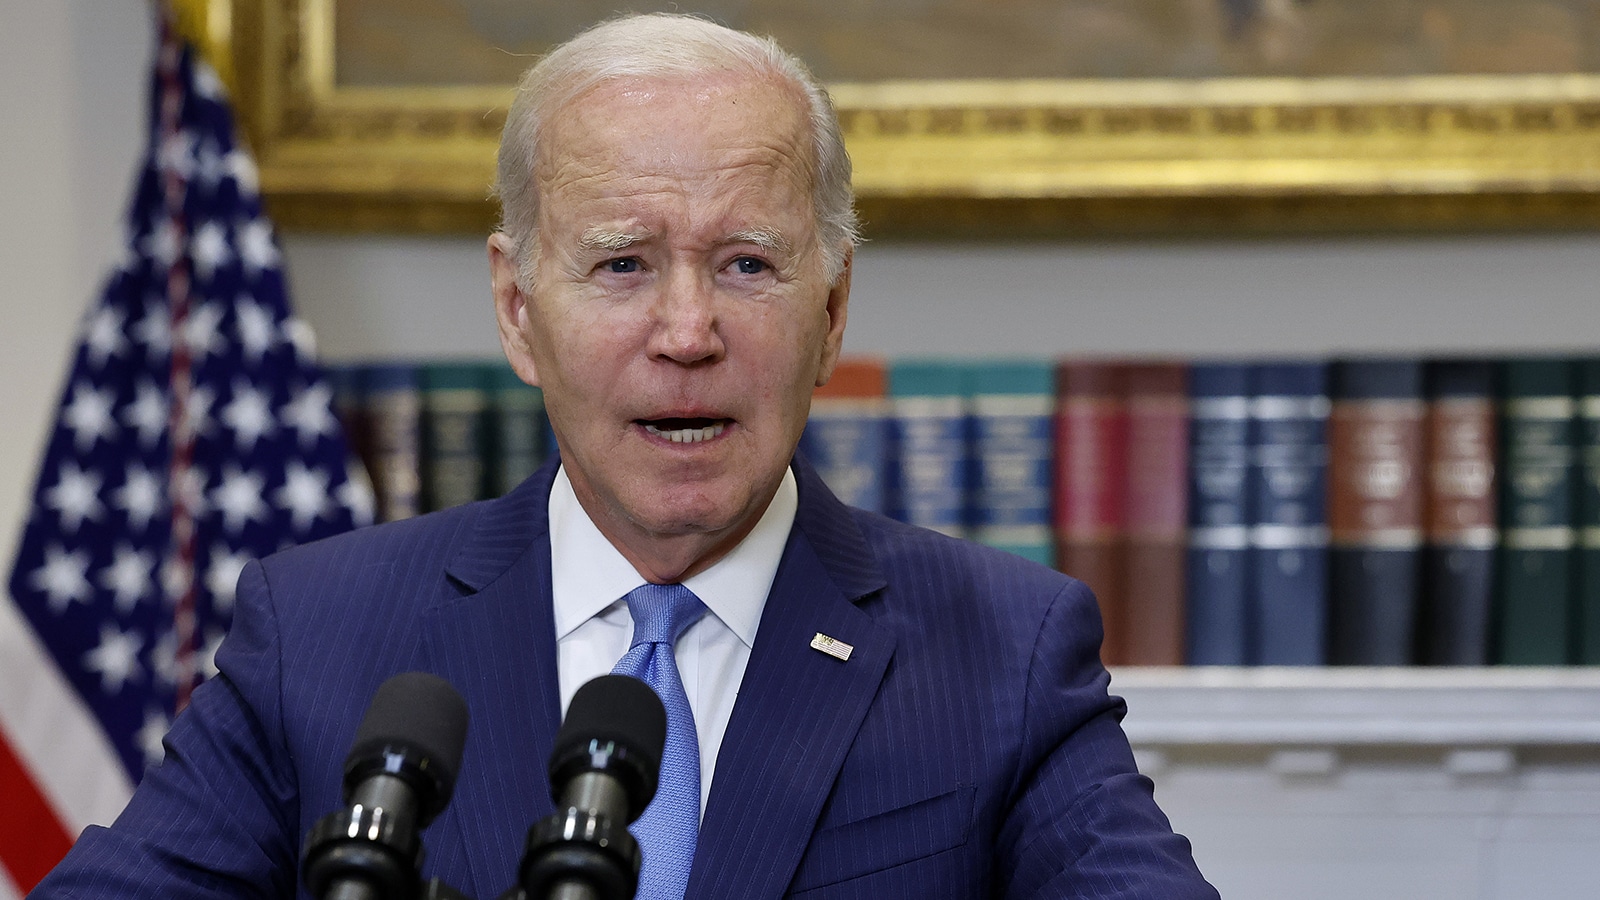 Articles Of Impeachment To Be Filed Against President Joe Biden